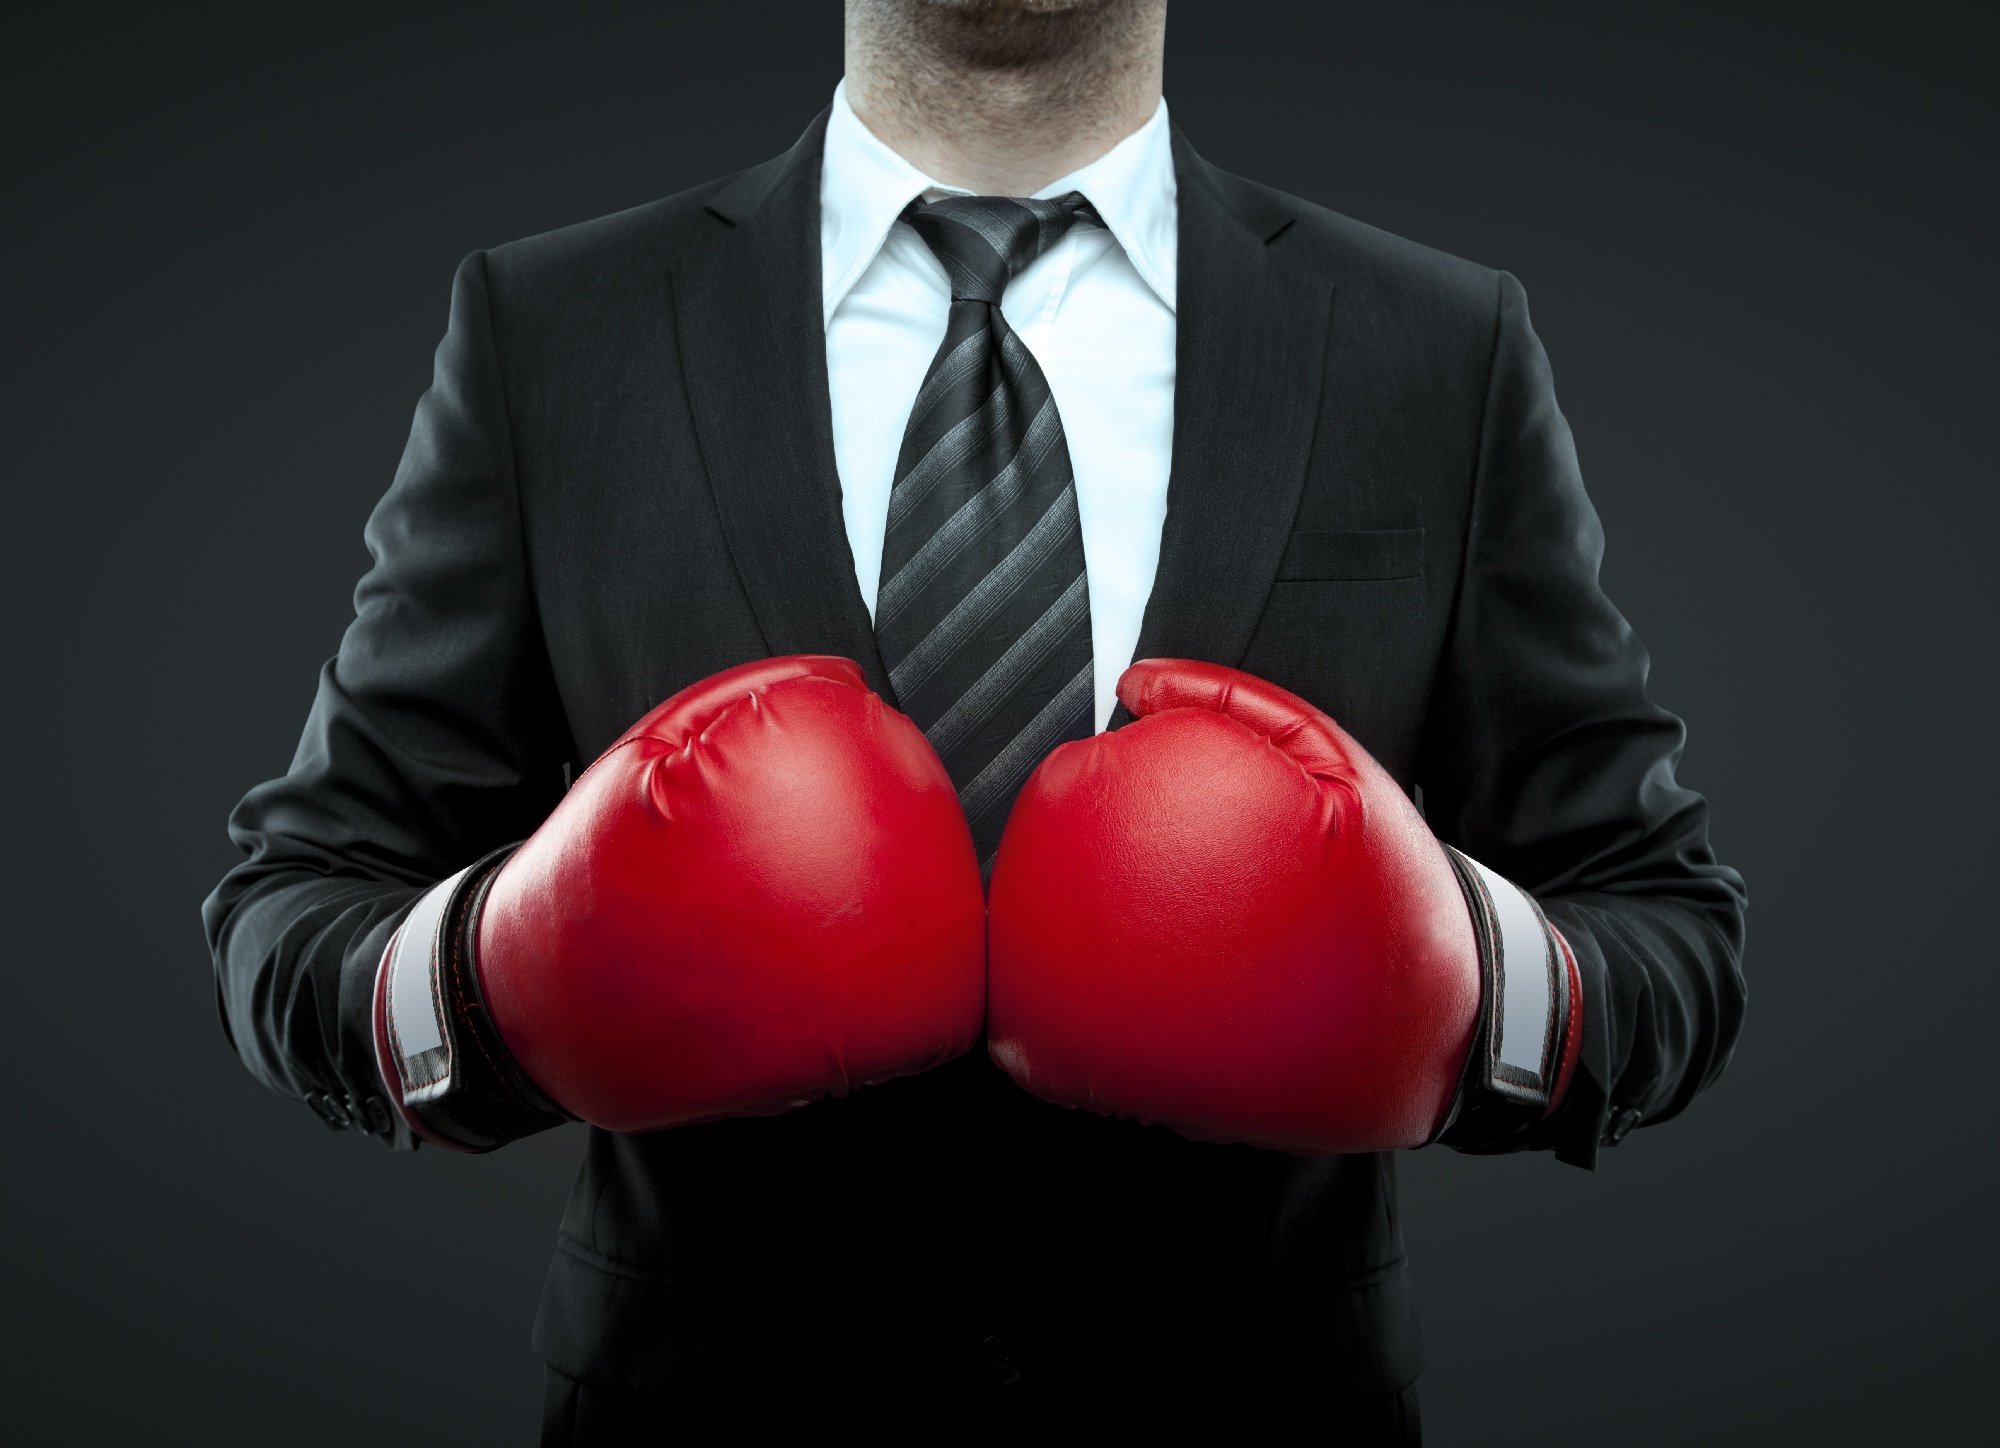 Man in suit with red boxing gloves